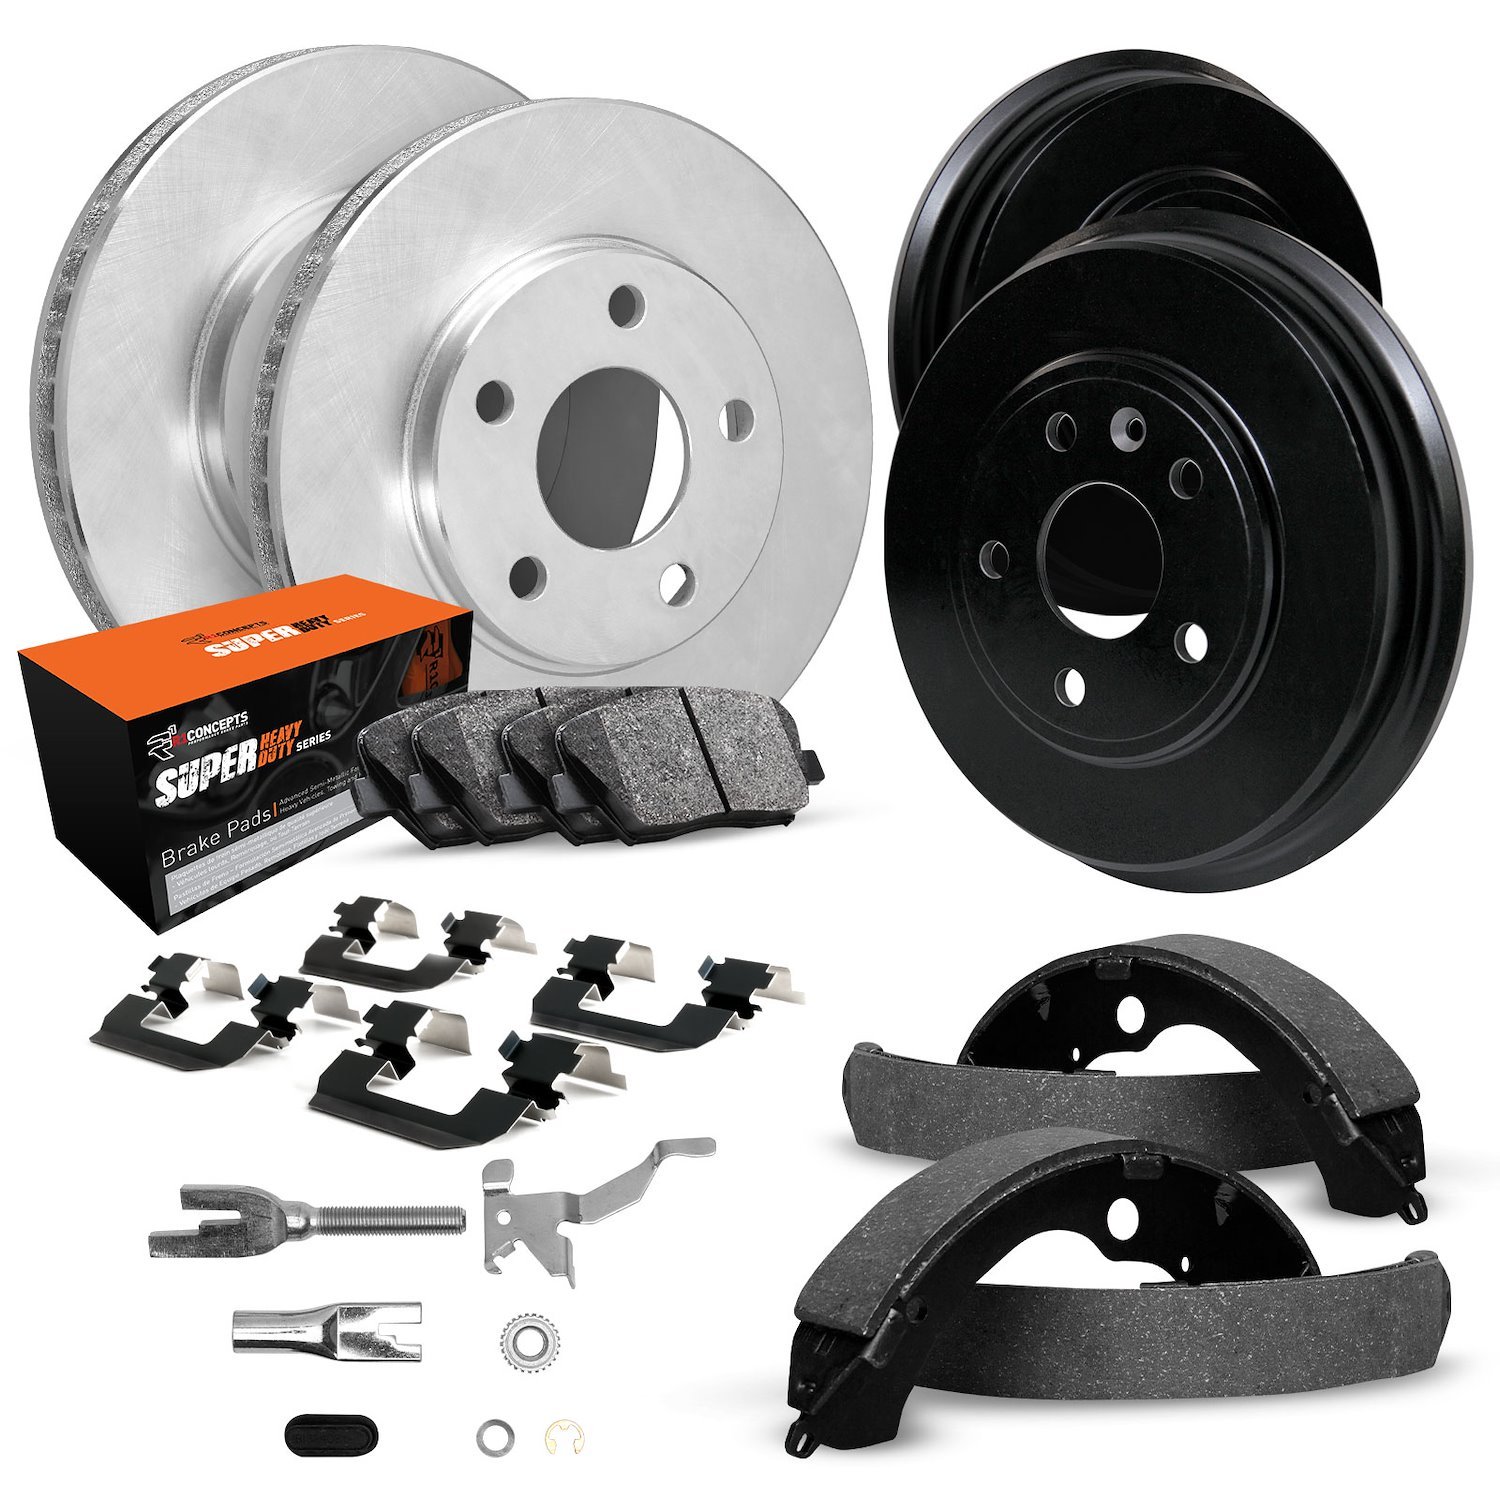 E-Line Blank Brake Rotor & Drum Set w/Super-Duty Pads, Shoes, Hardware, & Adjusters, 1986-1991 Ford/Lincoln/Mercury/Mazda